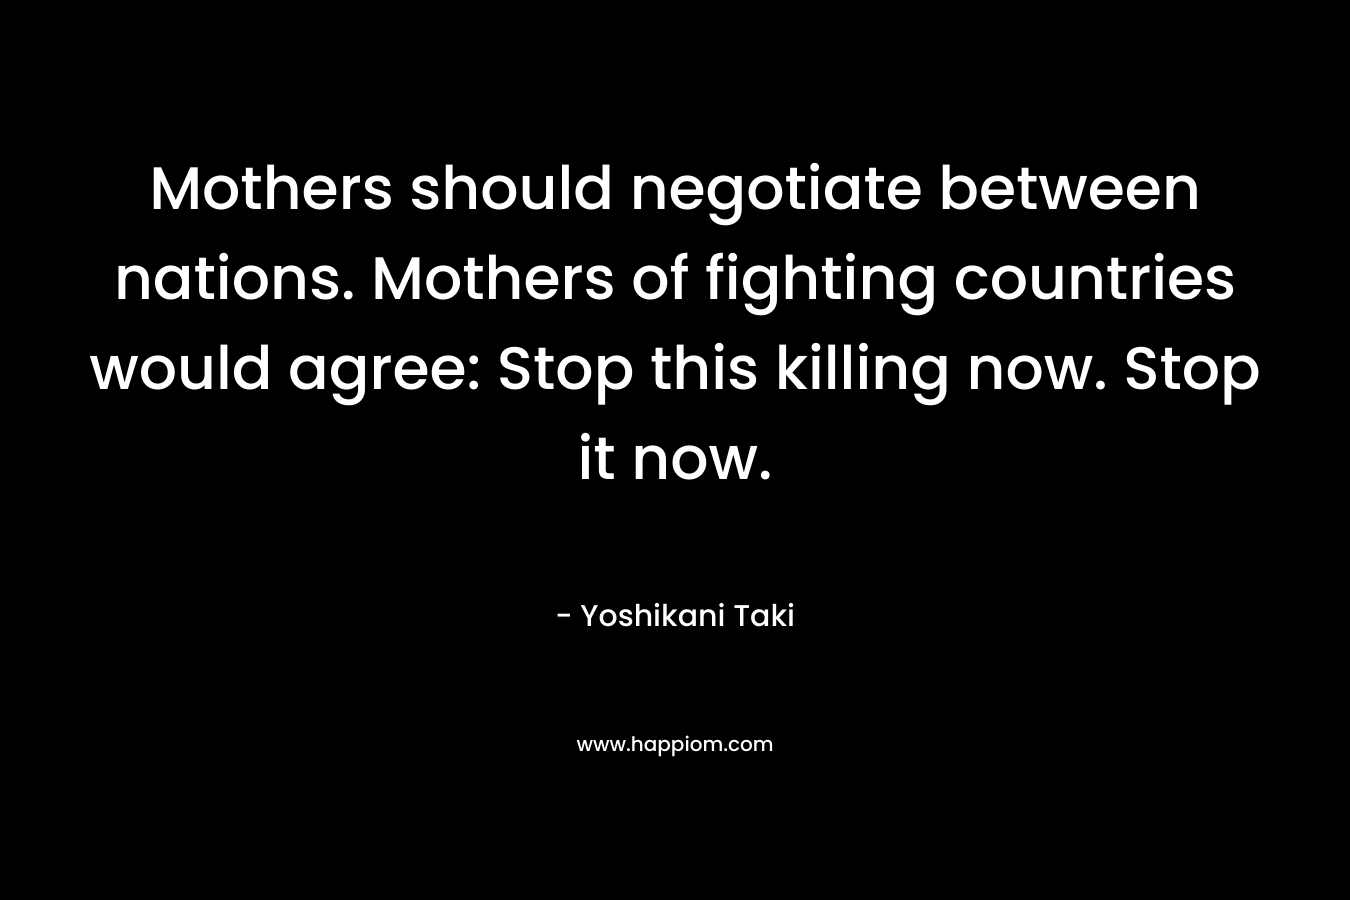 Mothers should negotiate between nations. Mothers of fighting countries would agree: Stop this killing now. Stop it now.